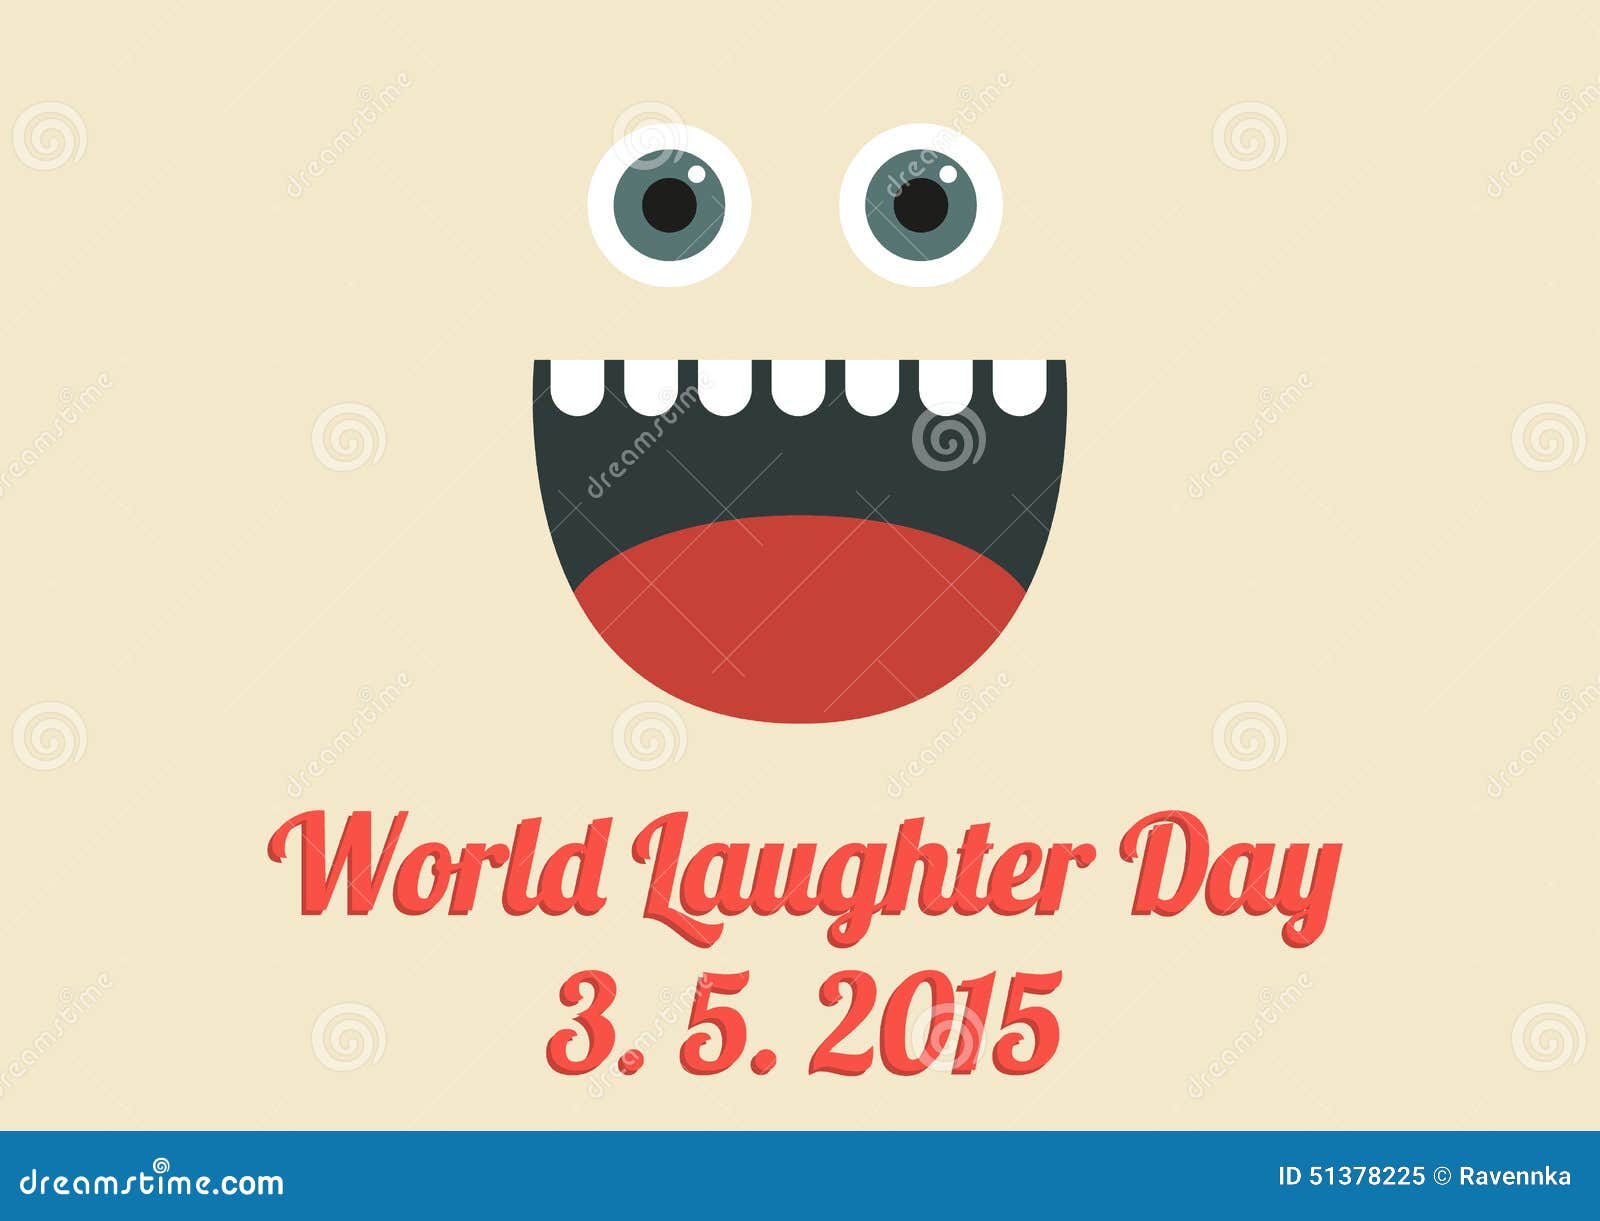 world laughter day card